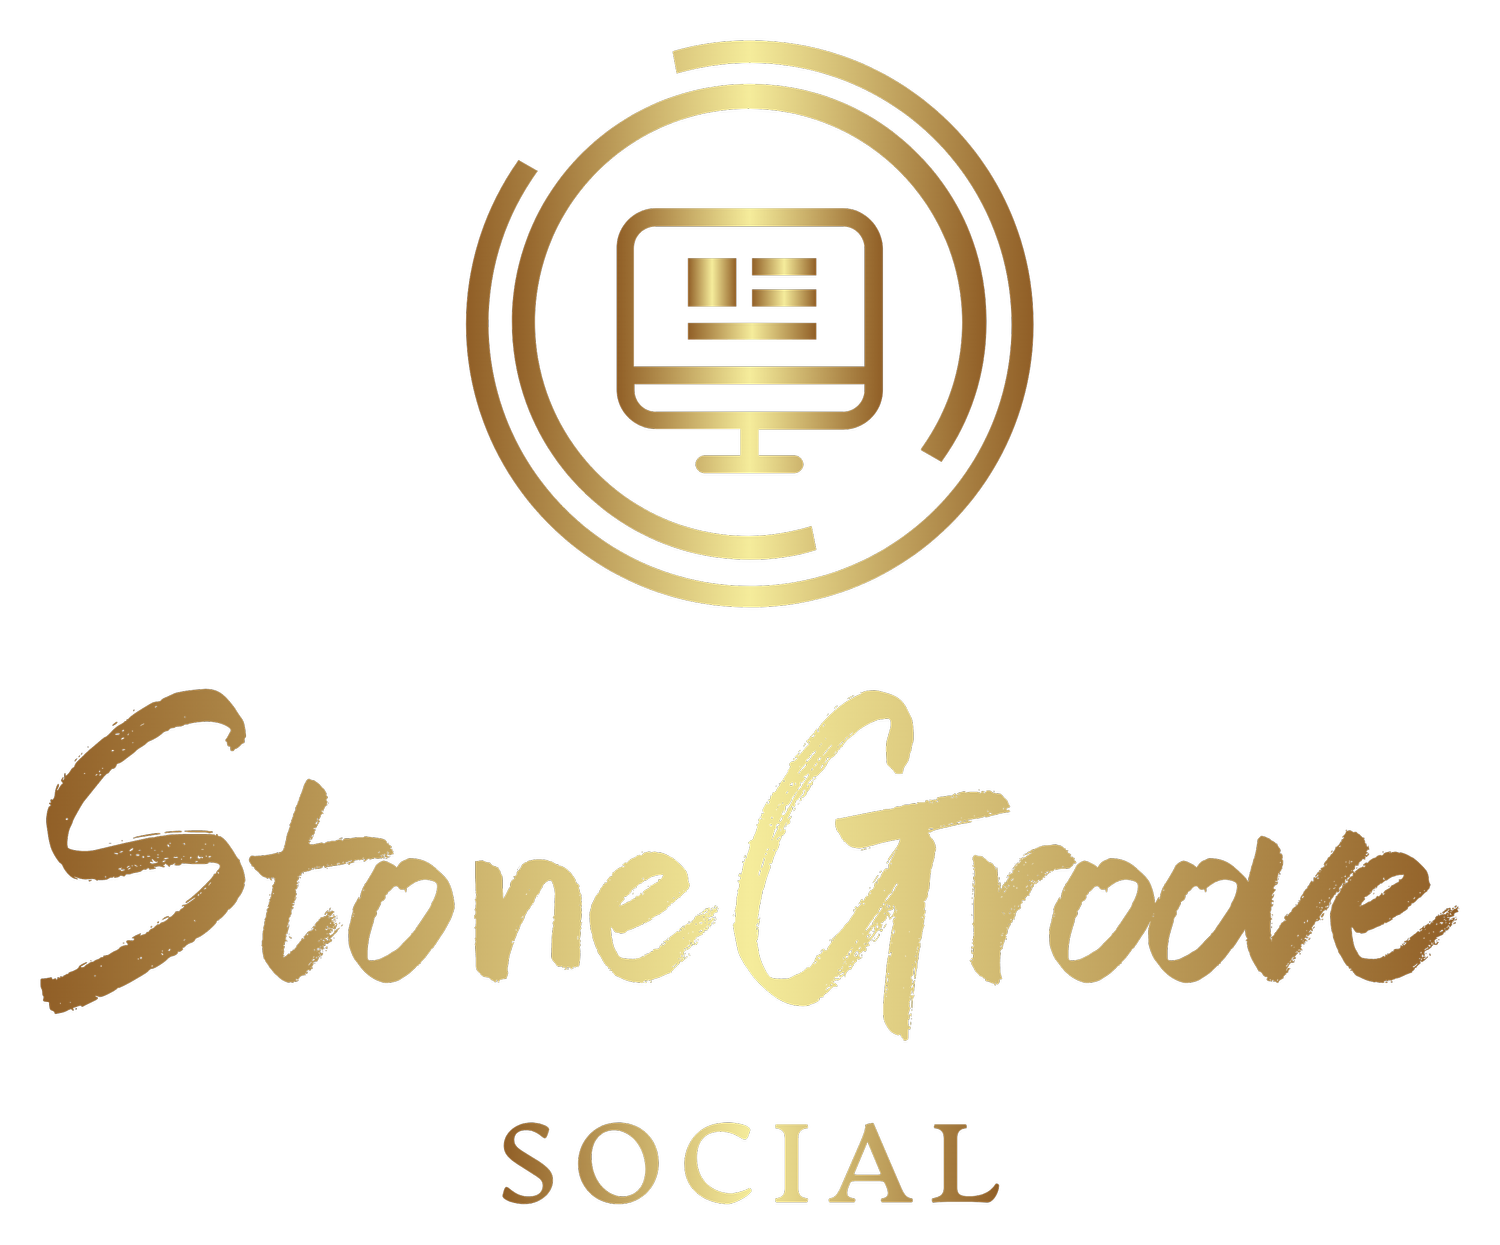 Stone Groove Social